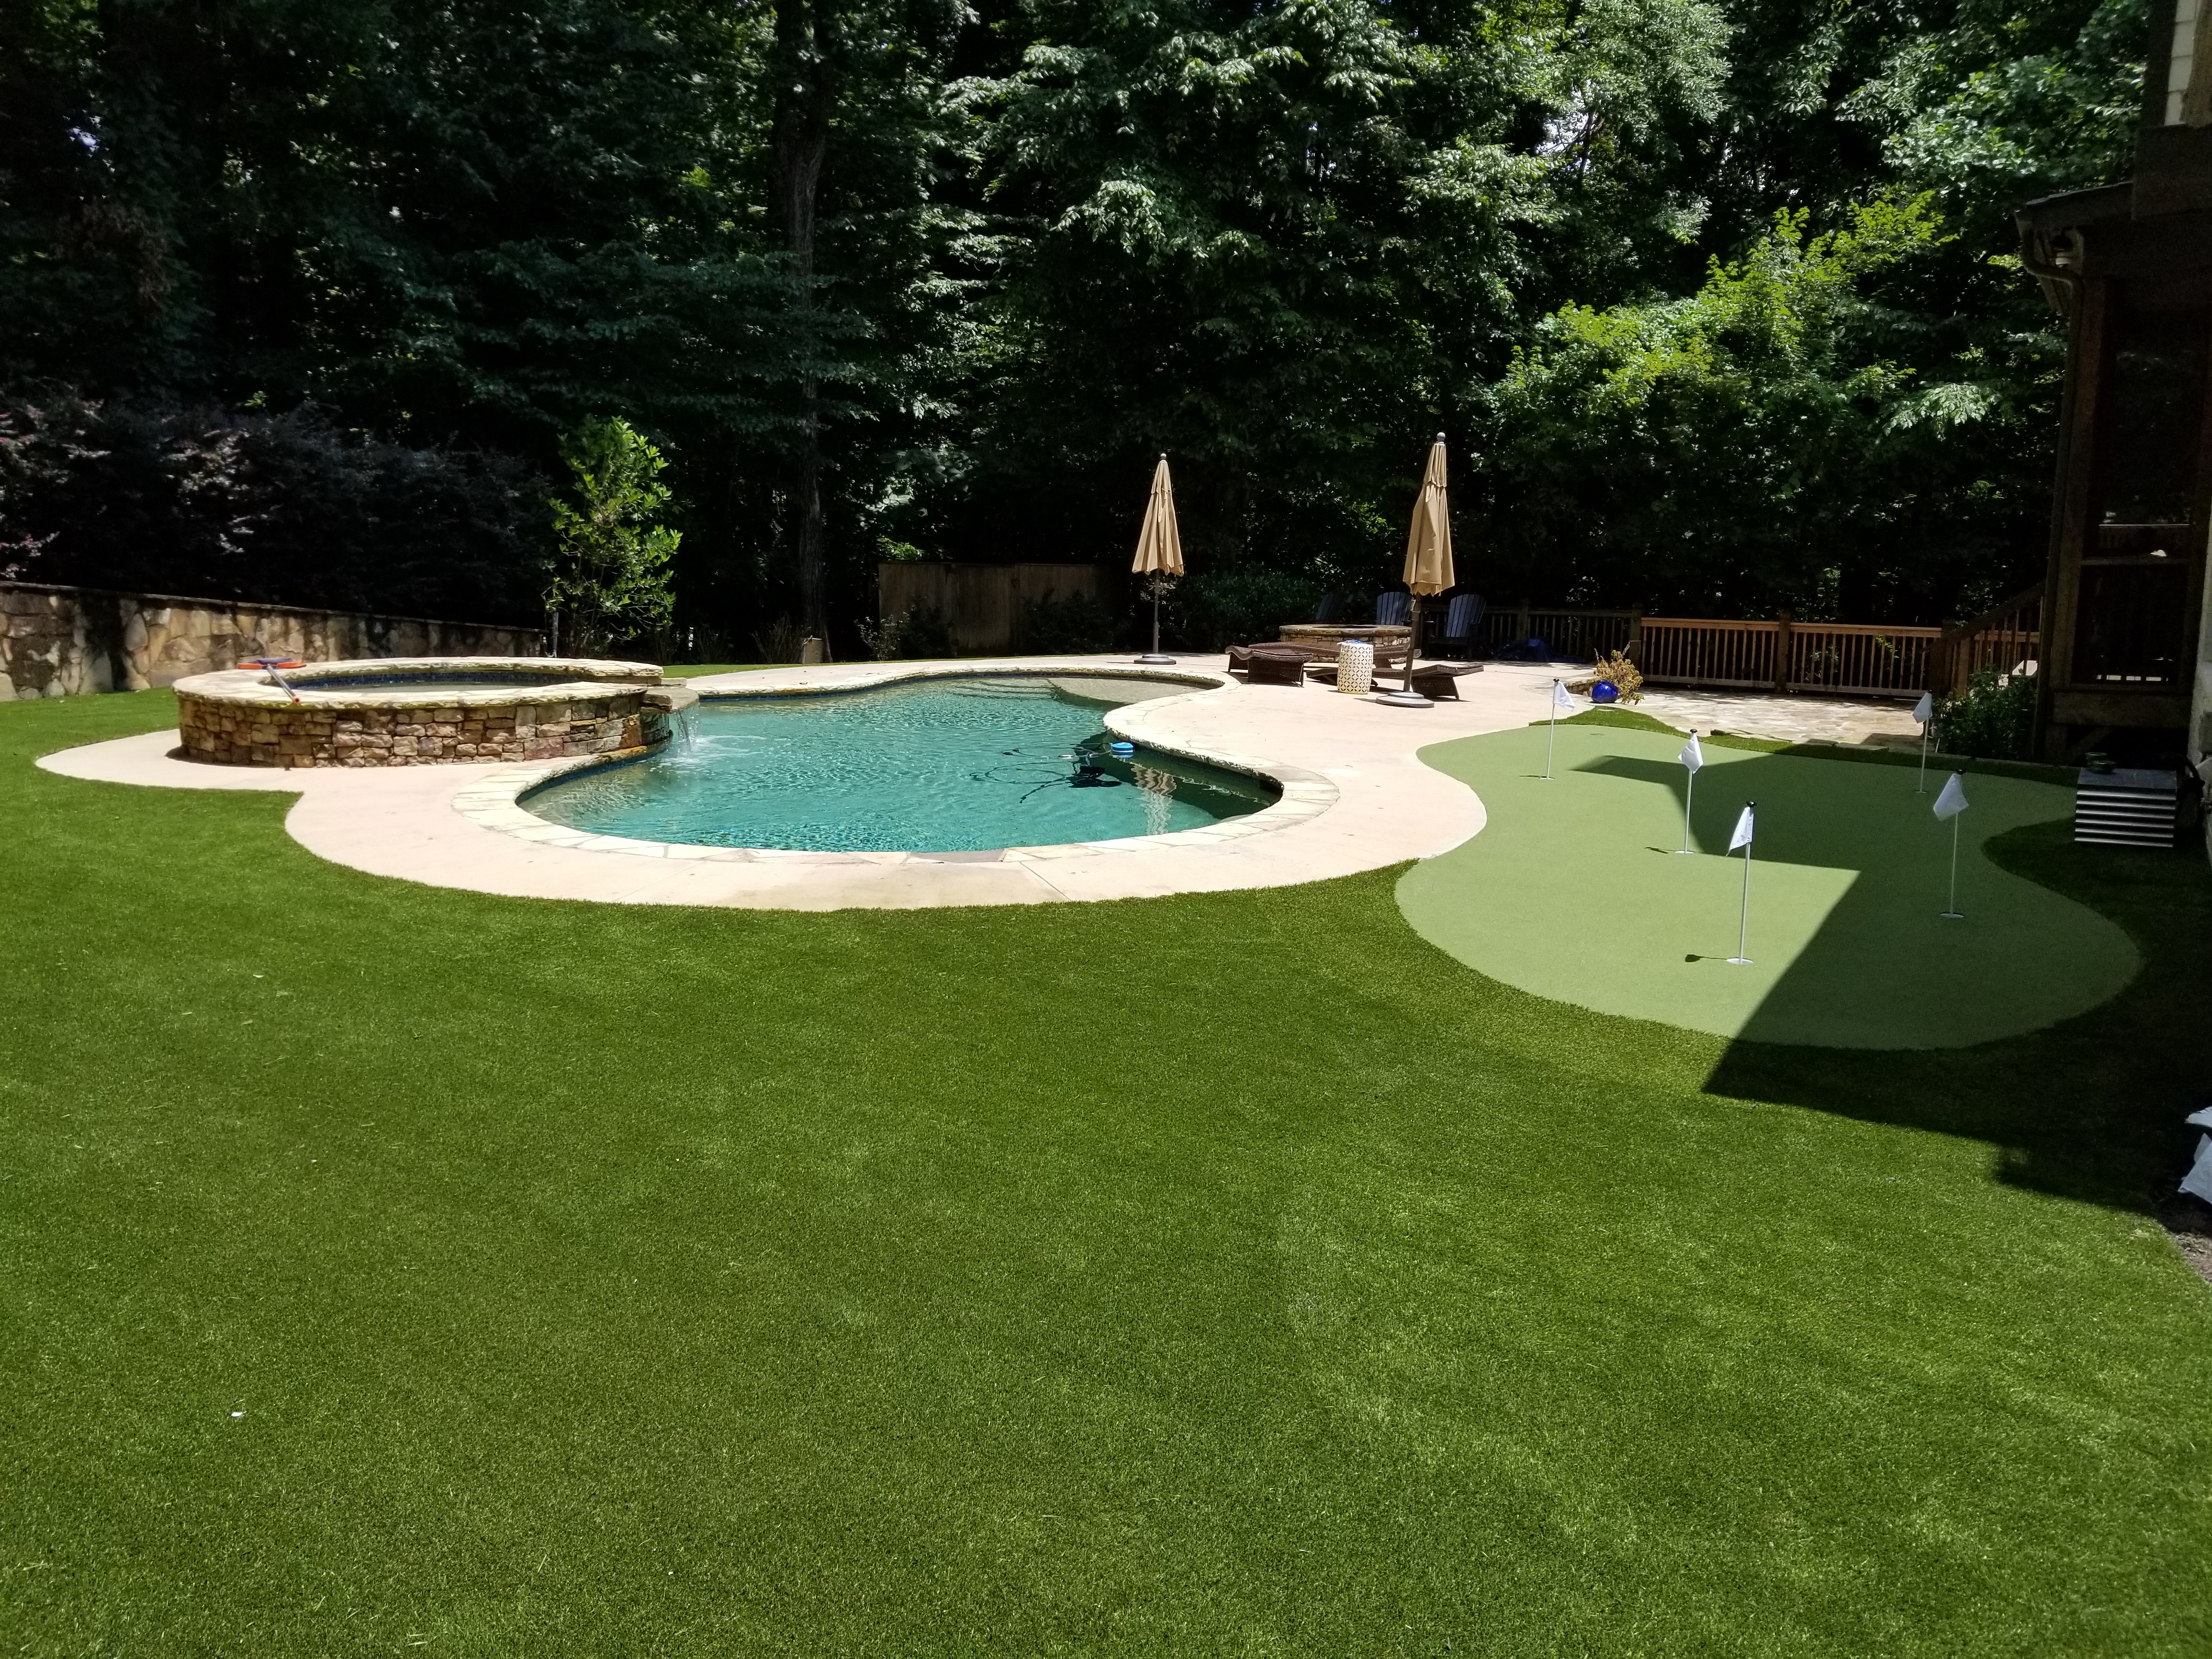 A Family Friendly Backyard With Something for Everyone | Turfscape